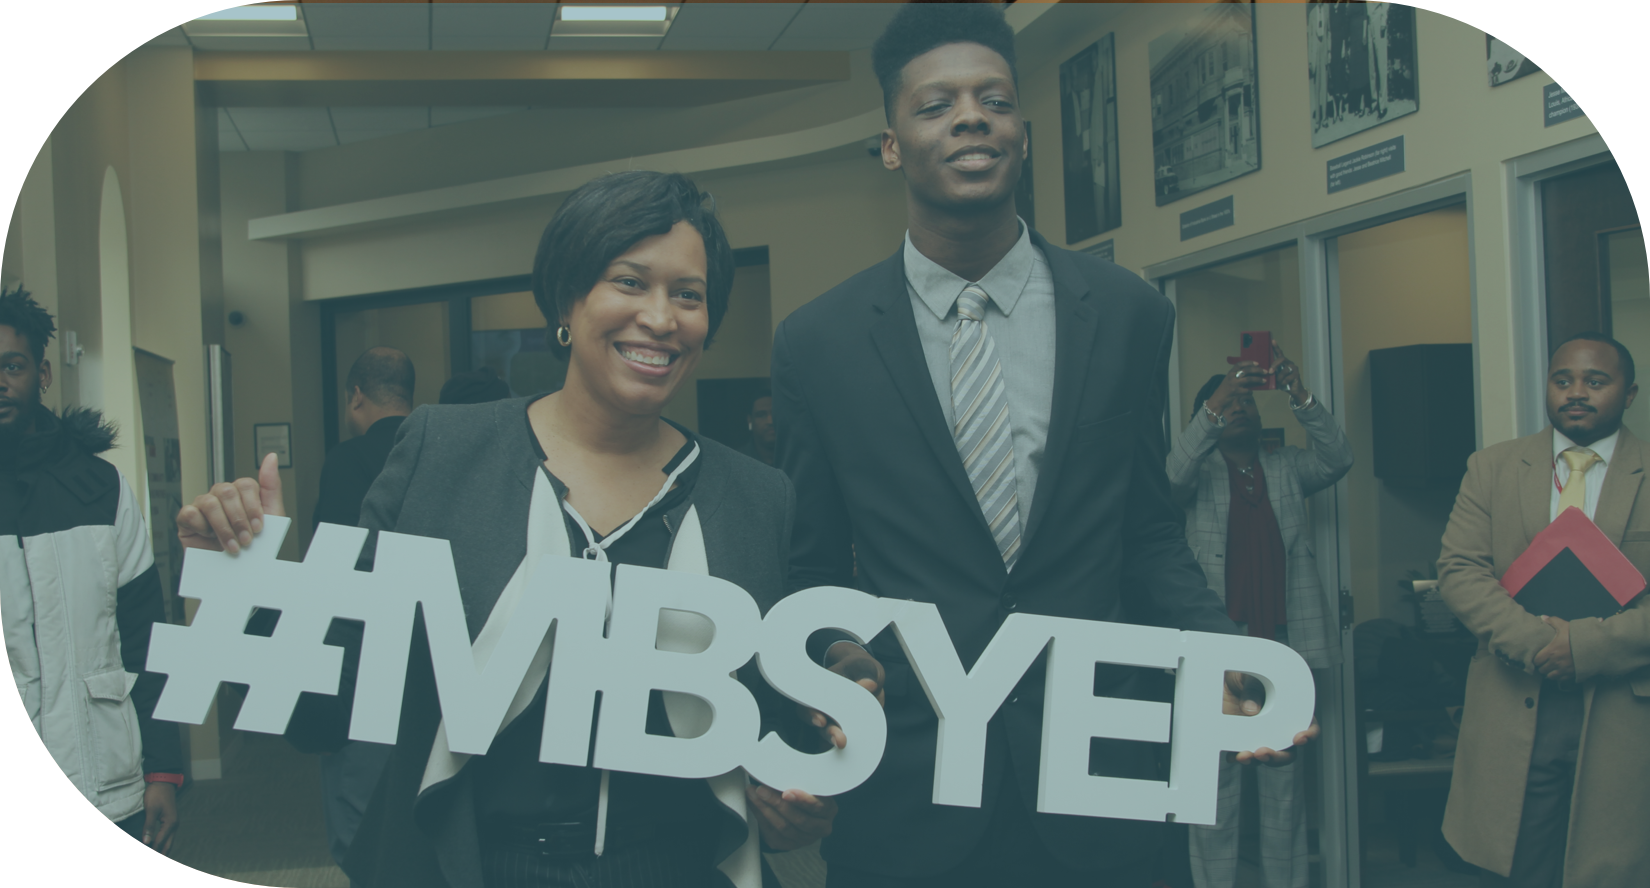 Image of Mayor Bowser and a young man holding up a sign that reads #MBSYEP